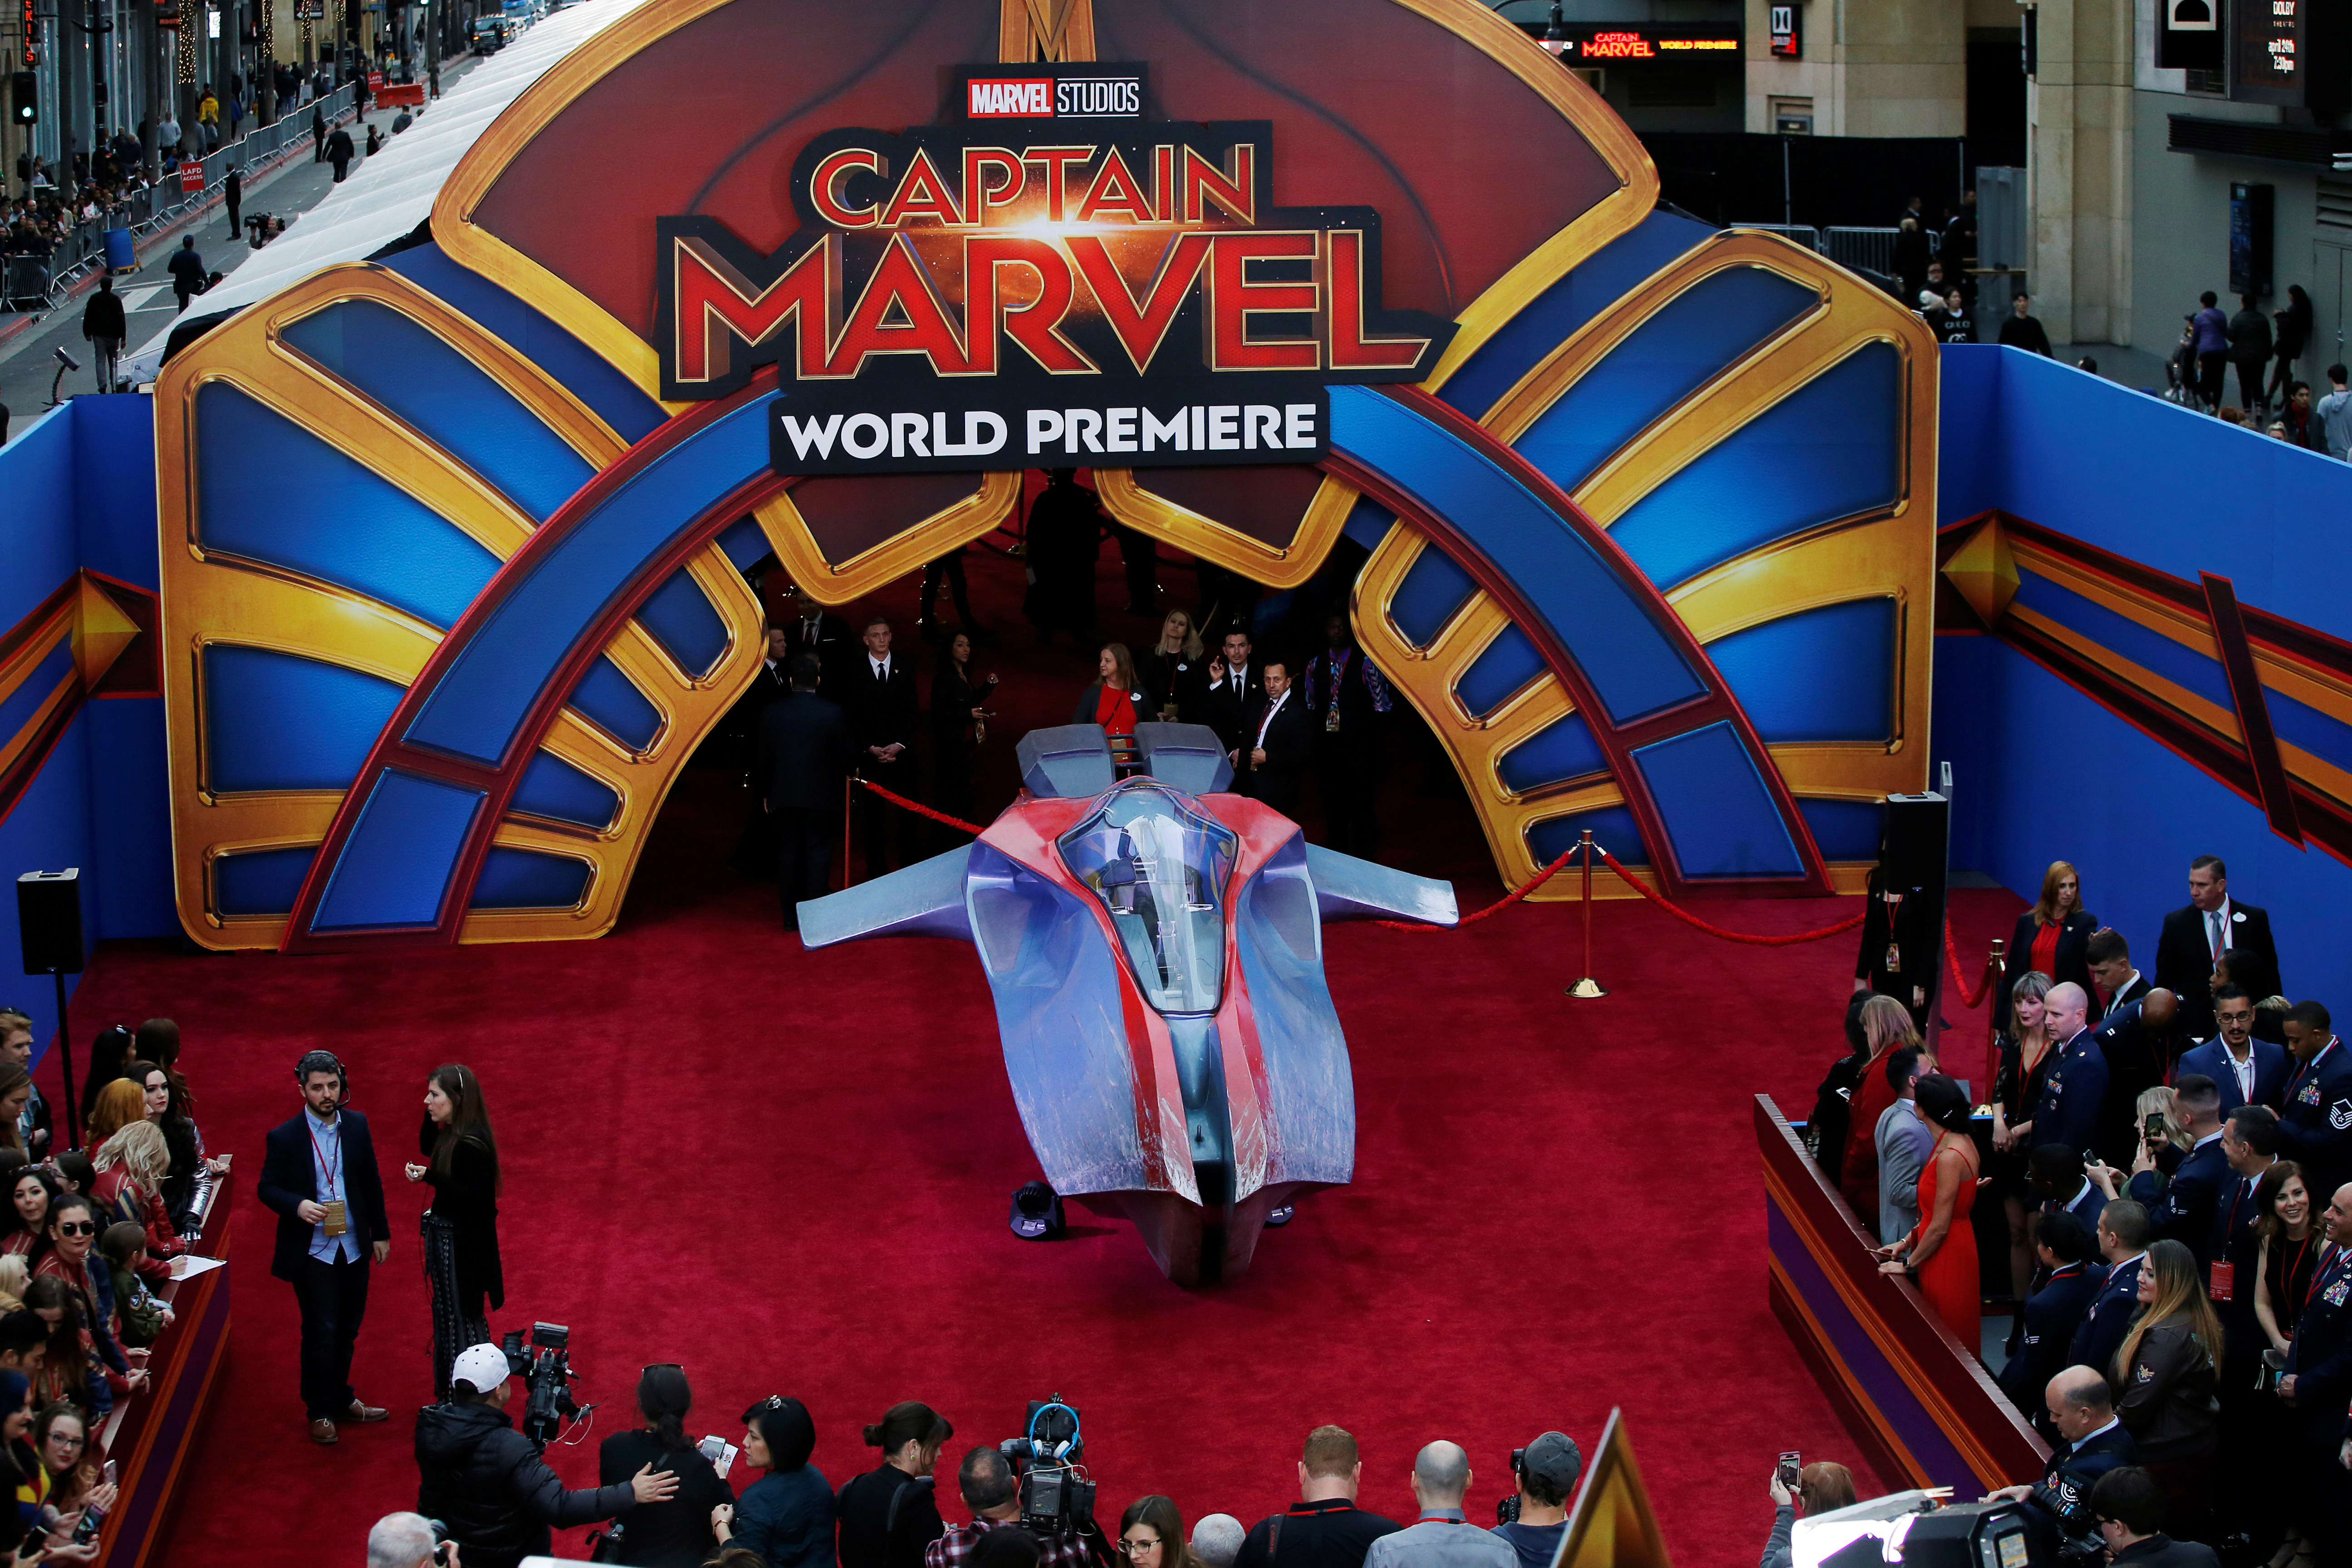 A general view of the premiere for the movie "Captain Marvel" in Los Angeles